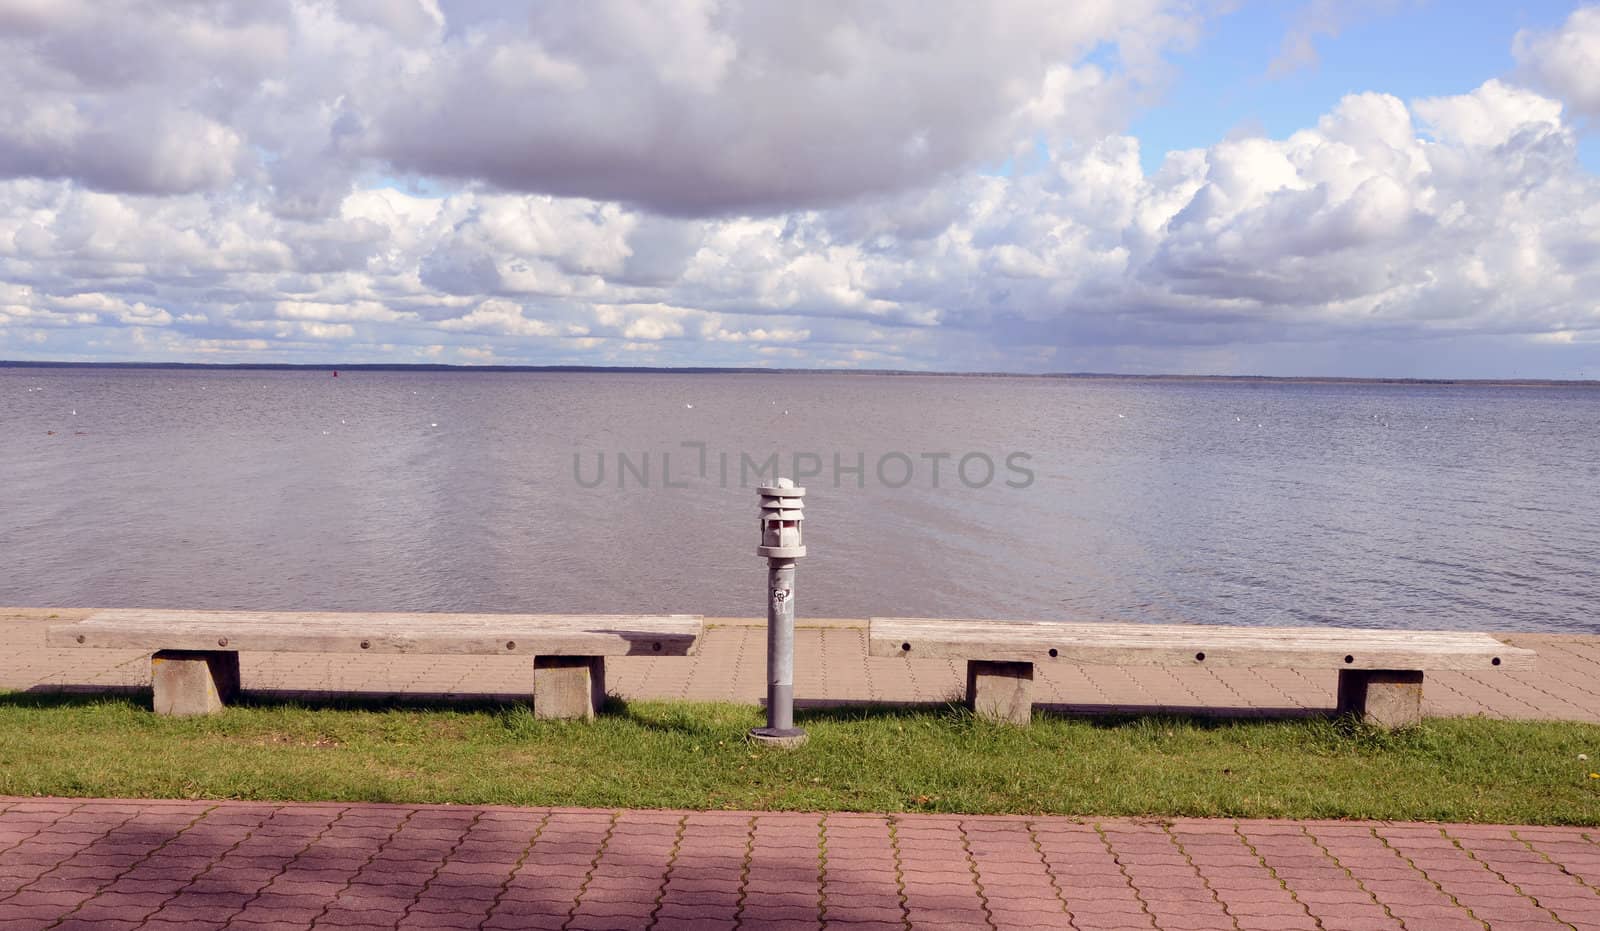 Benches and lighting in front of the lake and the cloudy sky. Park View.